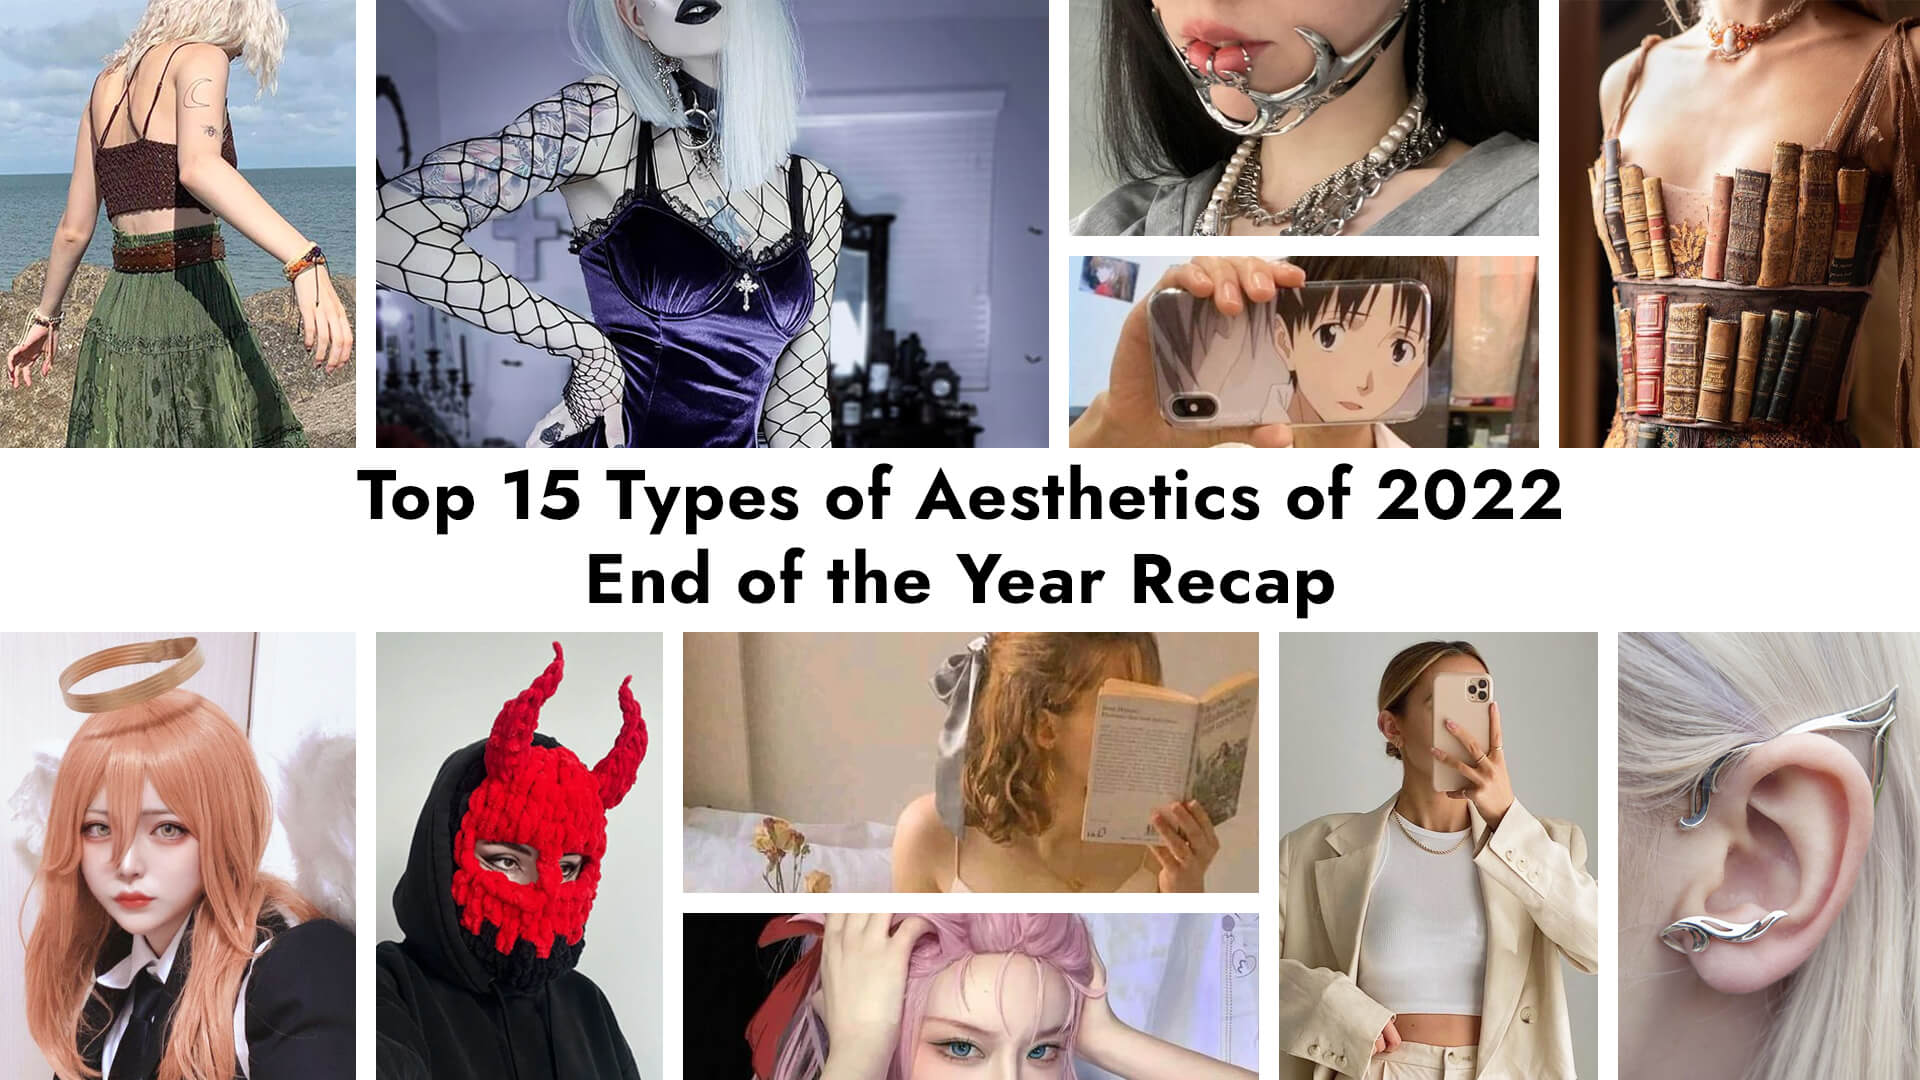 Top 15 Types of Aesthetics of 2022 - End of the Year Recap